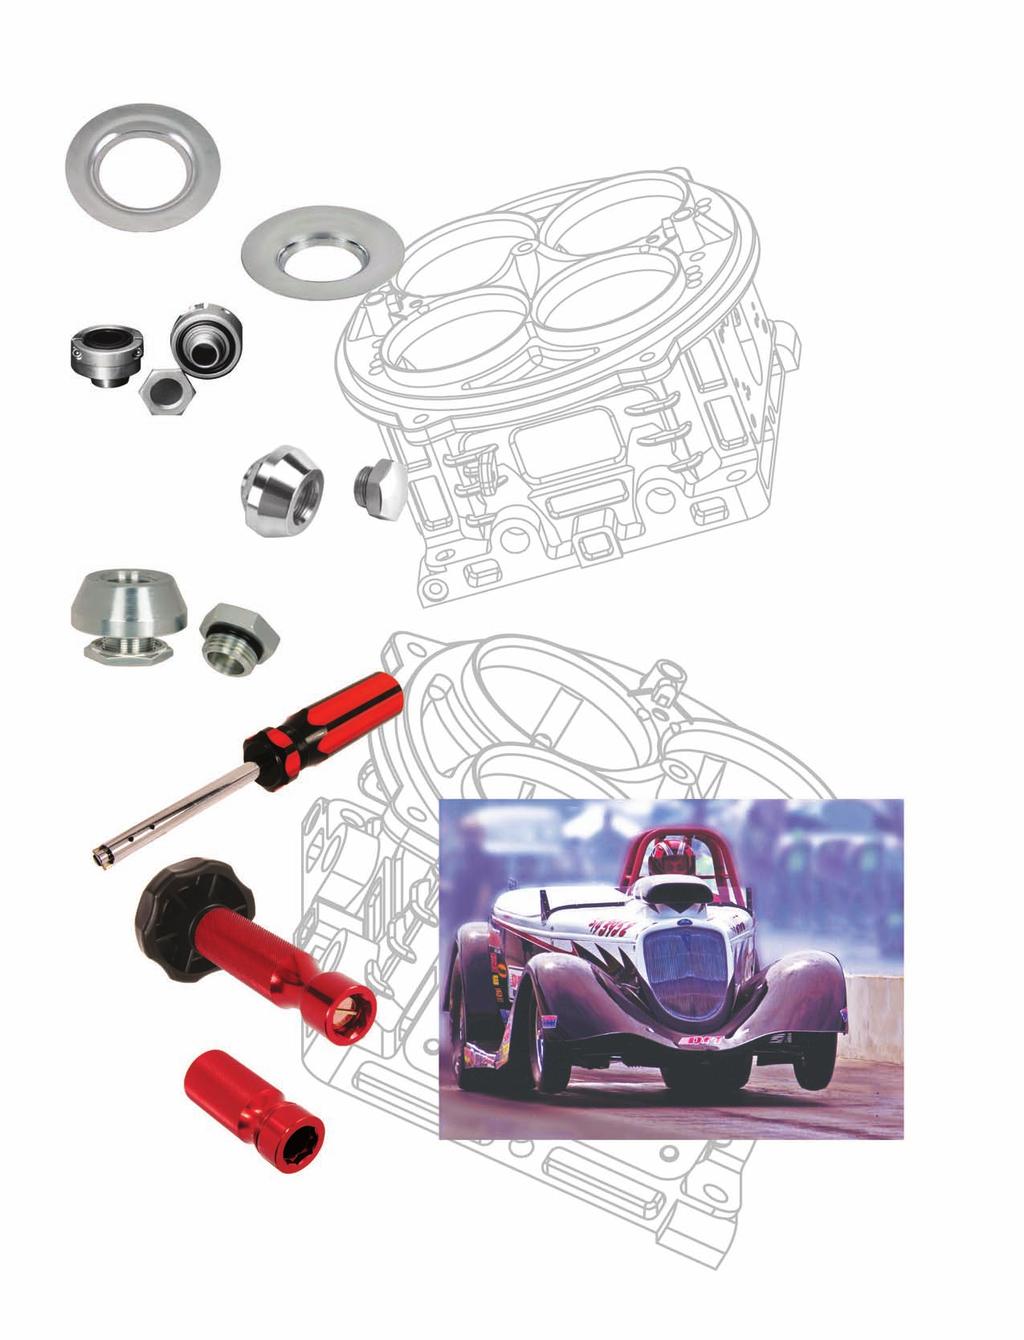 Specialty Parts & Tools 200-2 200-1 100-1 Air Bells 200-1 5-1/8" SAE air cleaner flange. Used to seal conventional 4 BBL carburetor to hood scoop. I.D.